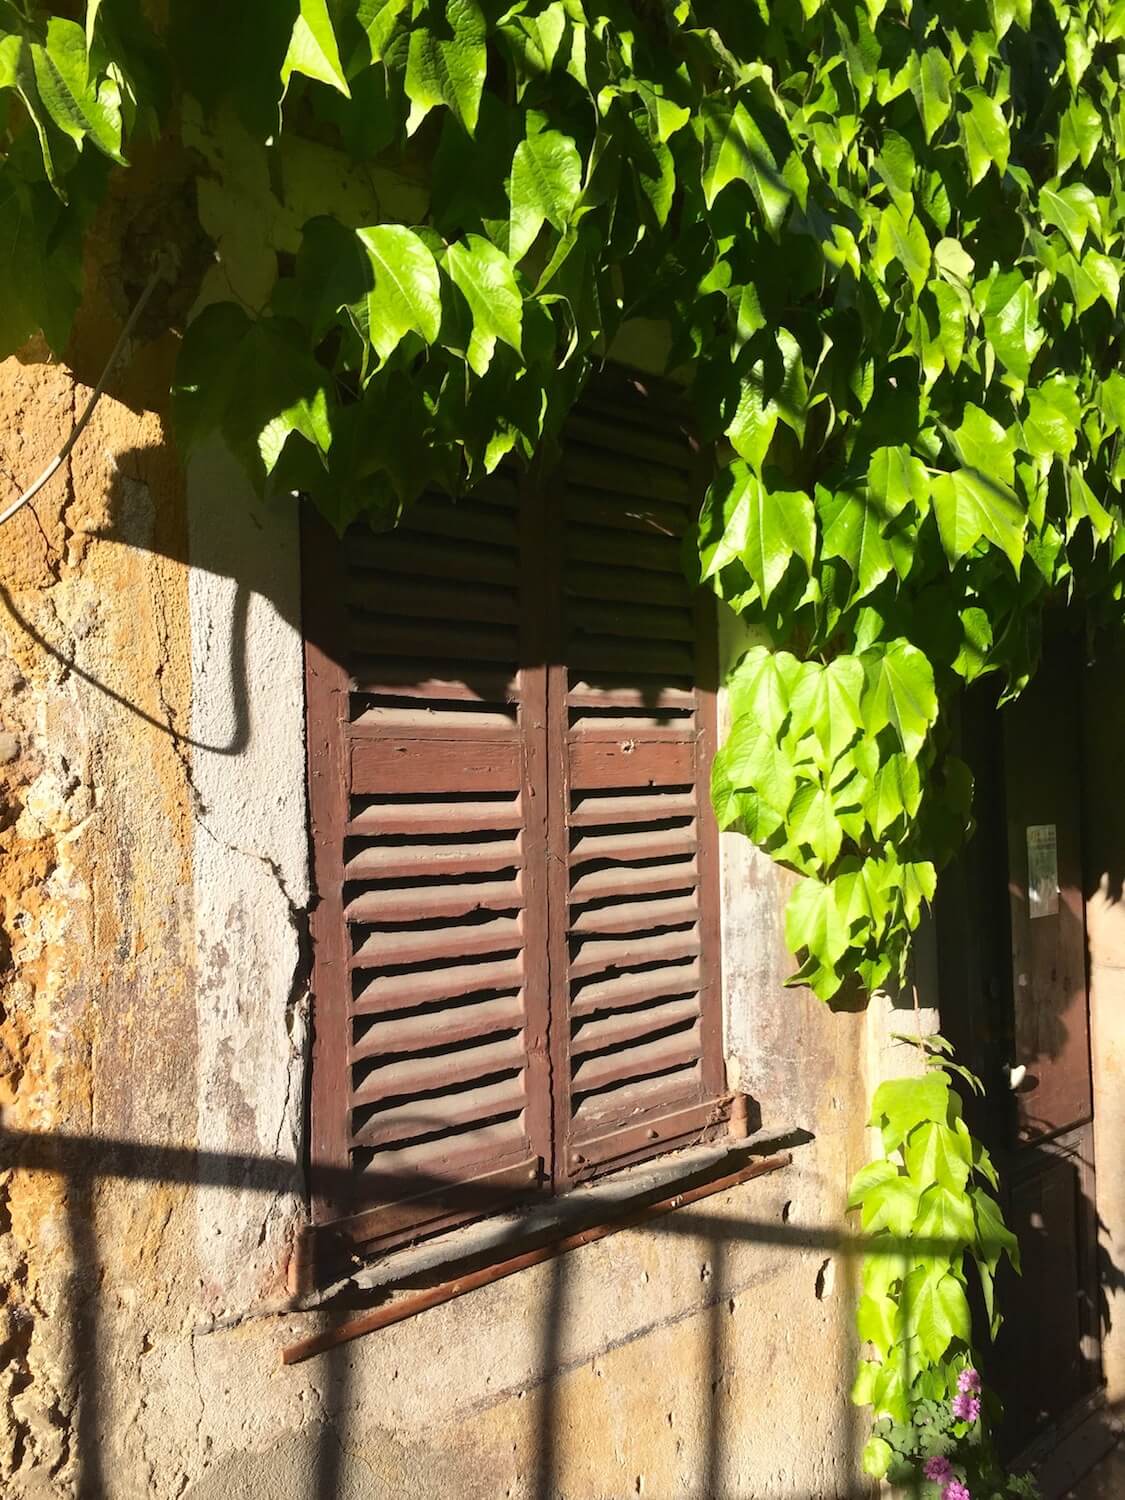 Wooden shutters with green leaves over hanging